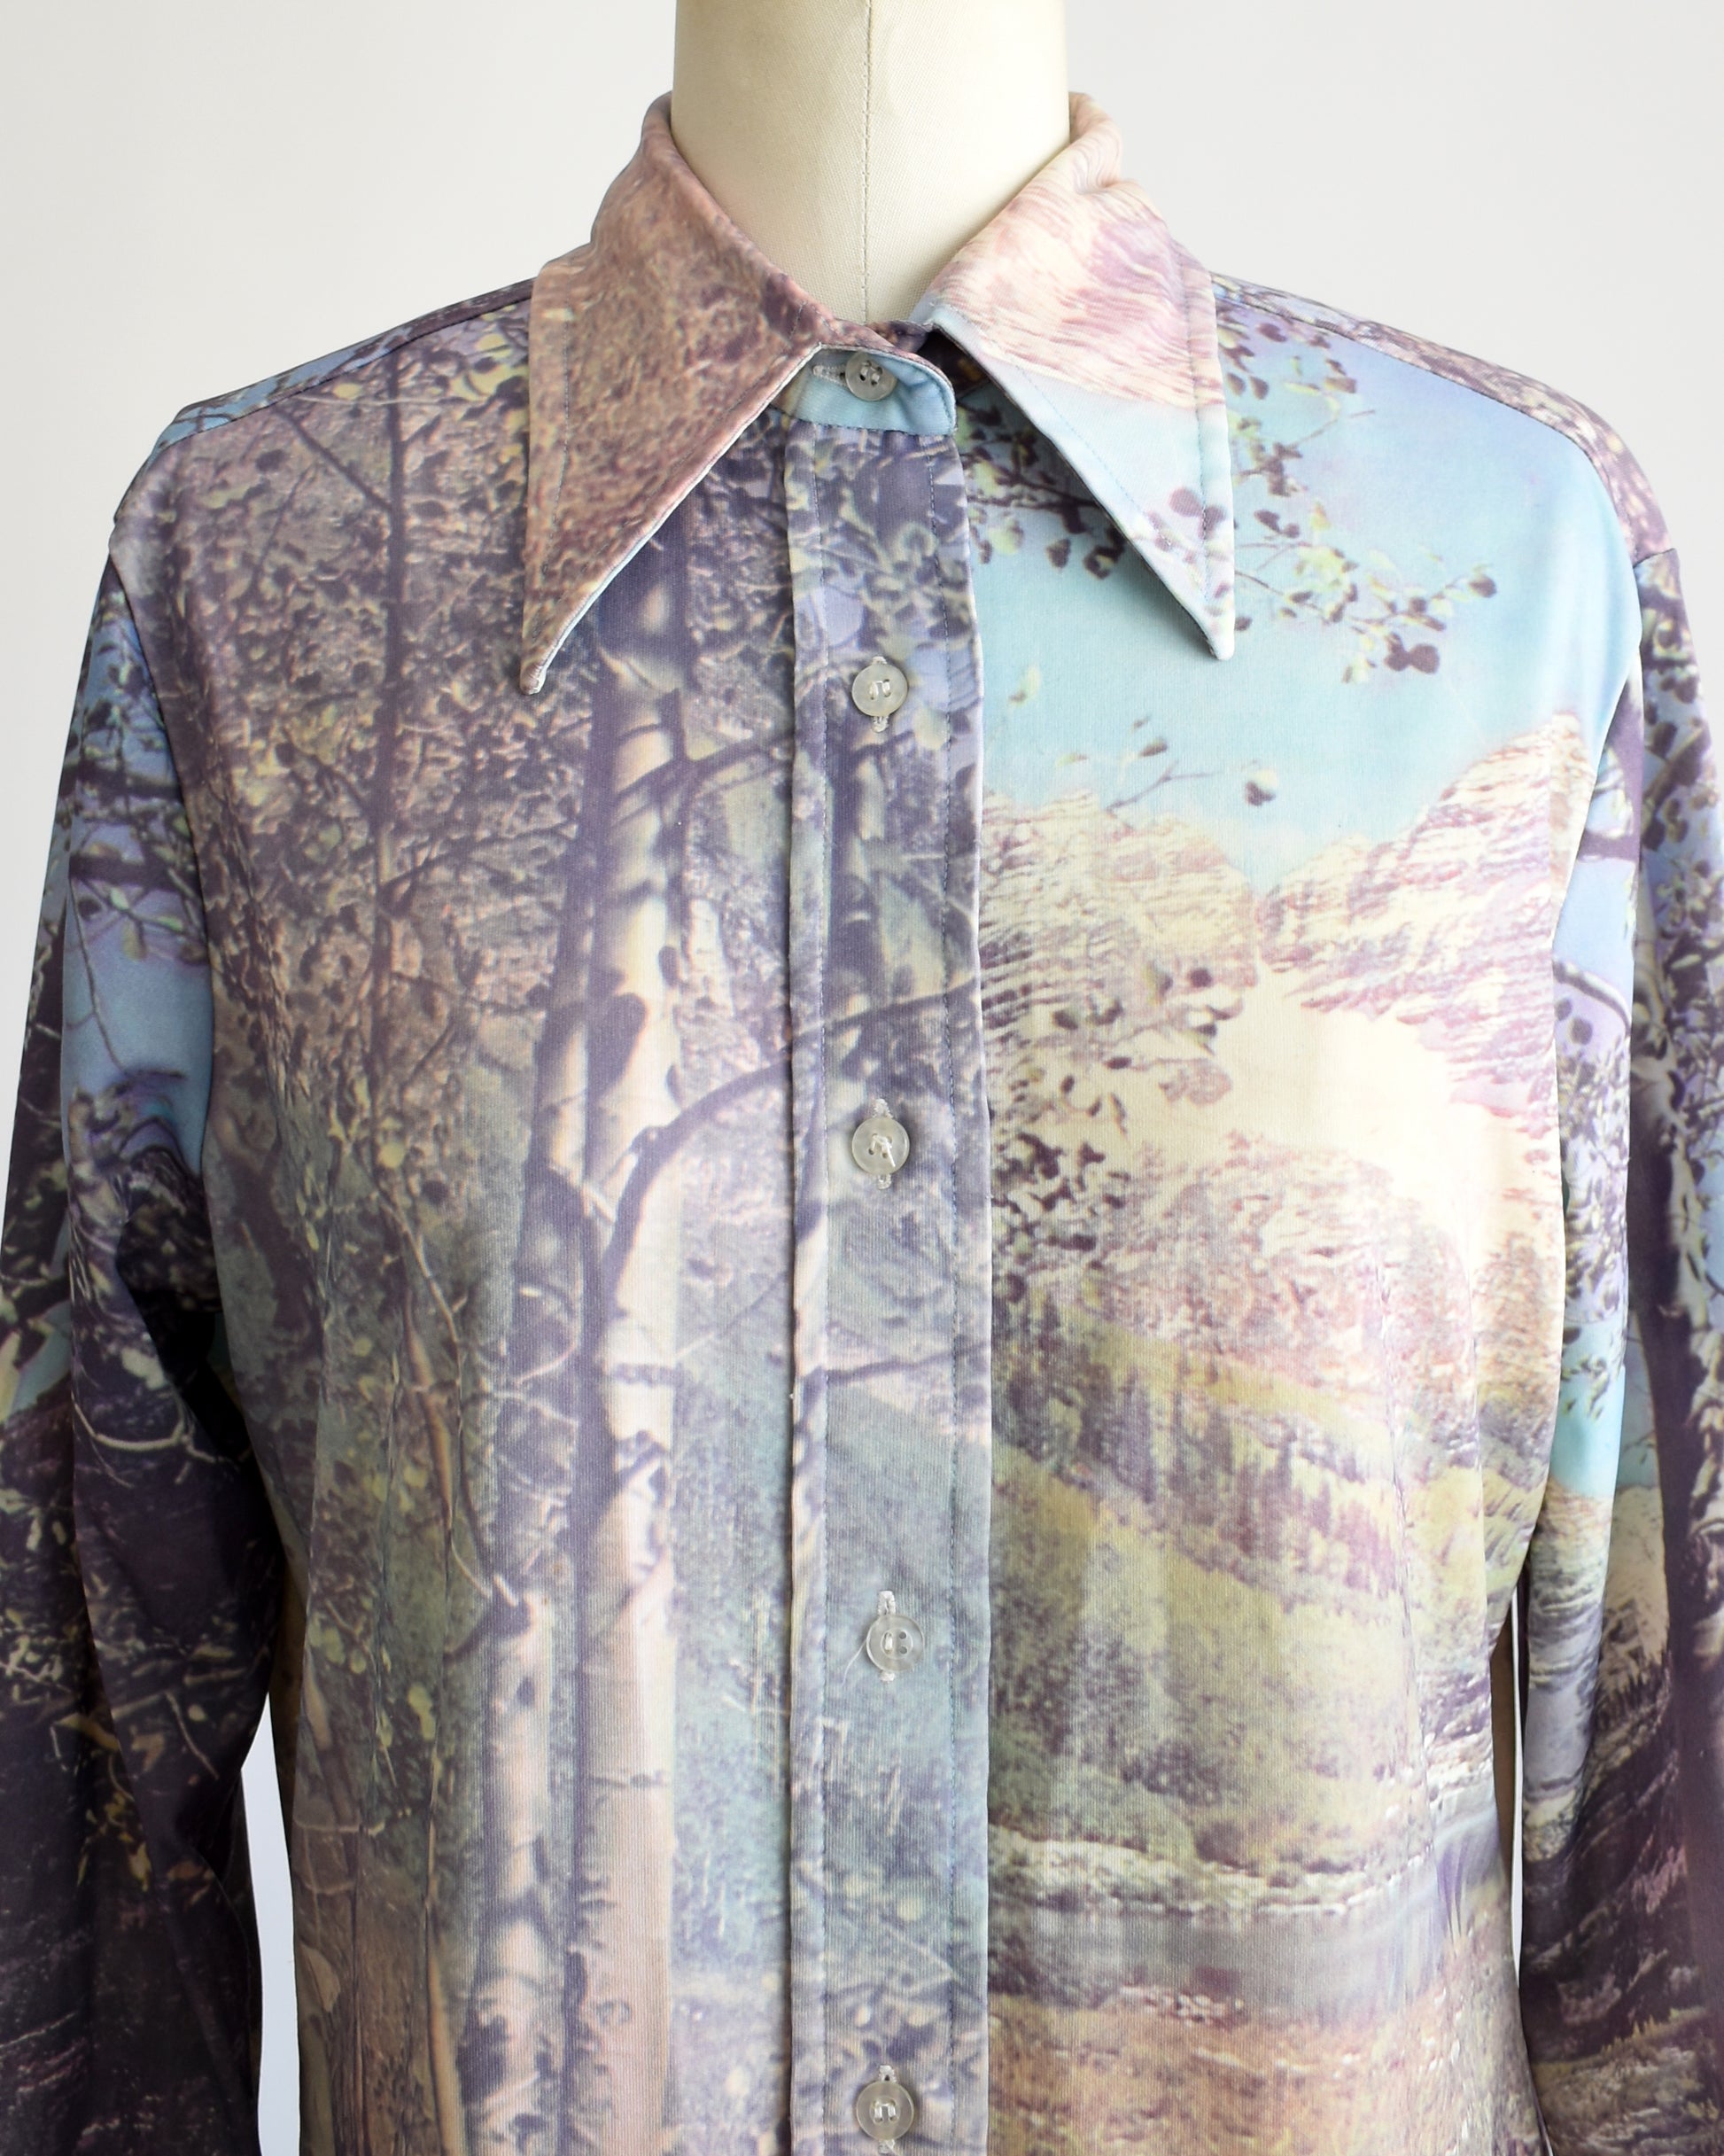 close up of the top of the blouse which shows the dagger collar, buttons, and mountain scene